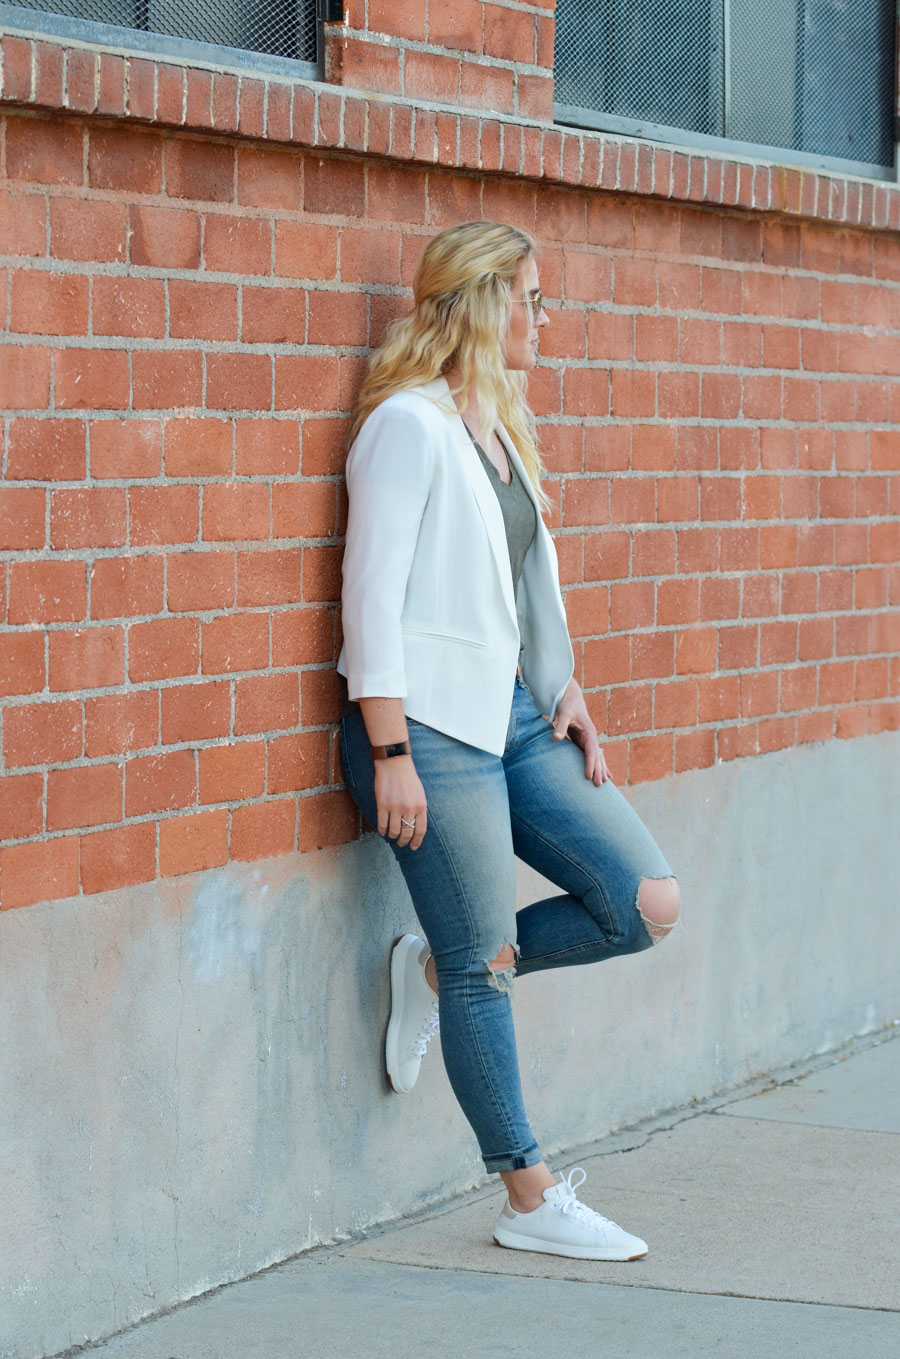 How to Wear Jeans with White Sneakers + Blazer Outfit